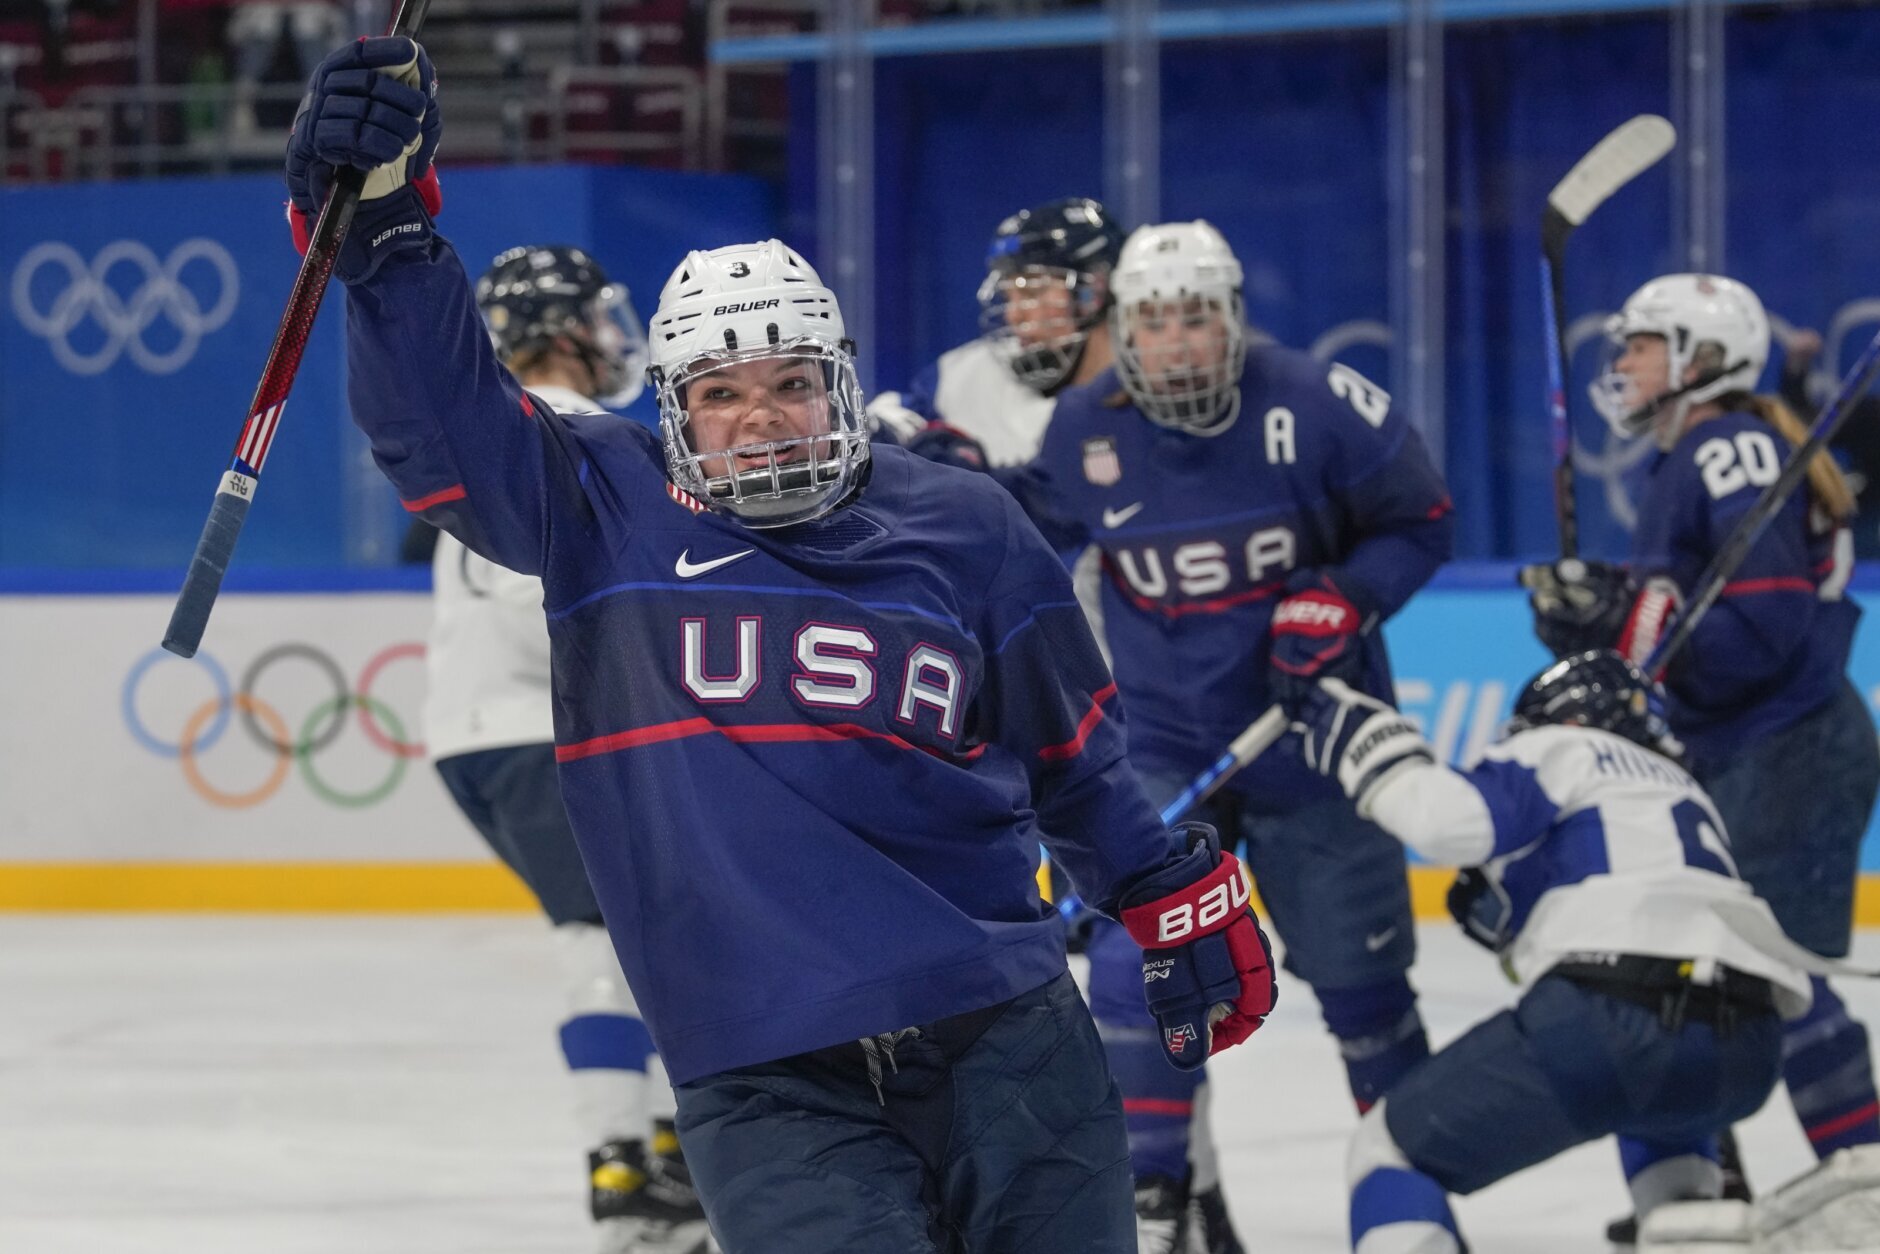 <p>United States&#8217; Cayla Barnes (3) celebrates after scoring a goal against Finland during a women&#8217;s semifinal hockey game at the 2022 Winter Olympics, Monday, Feb. 14, 2022, in Beijing.</p>
